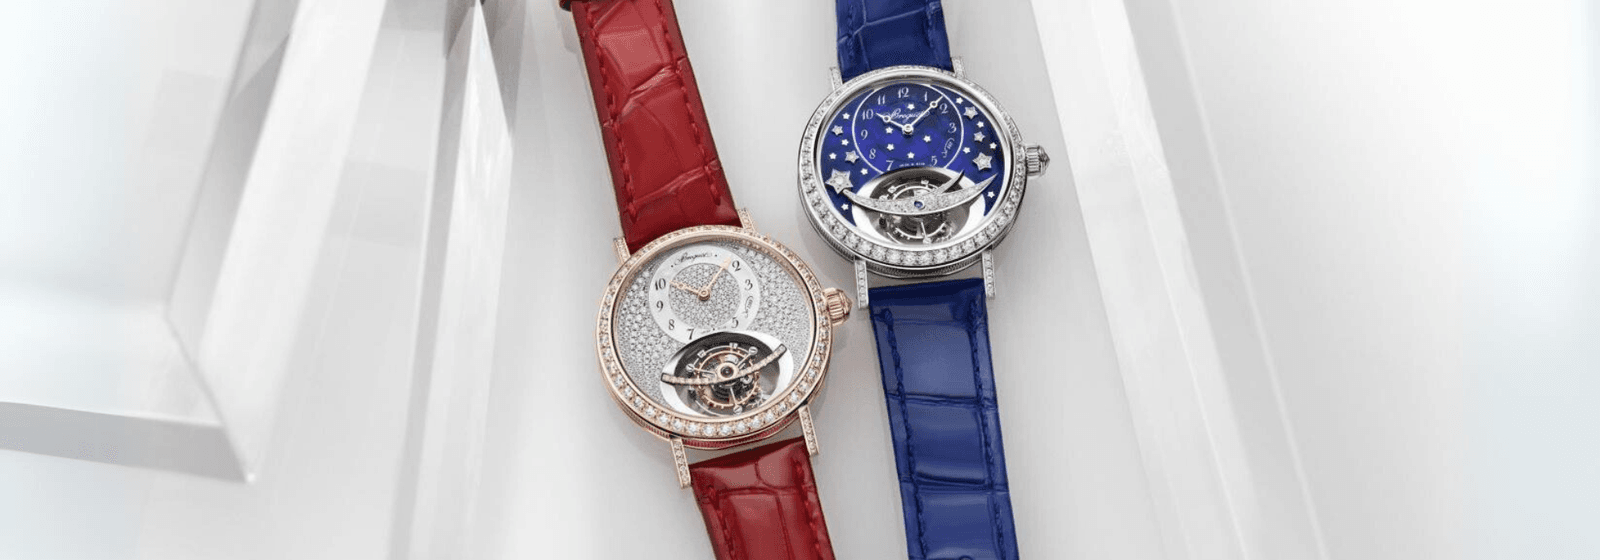 Breguet Dazzles With Two New Models Of The Classique Tourbillon 3558